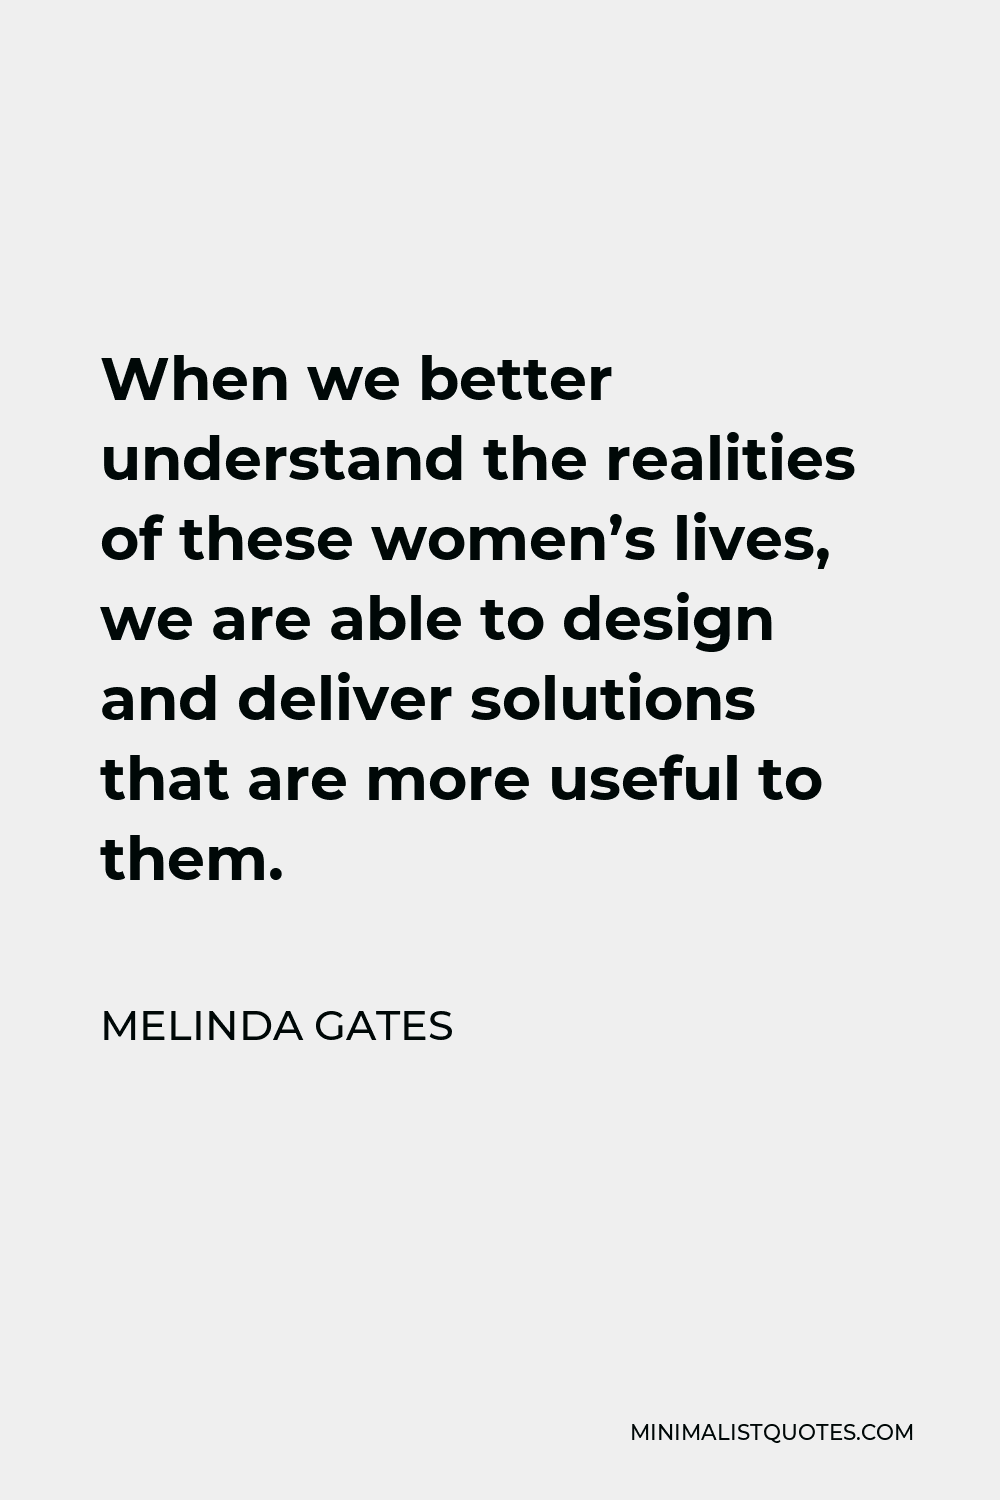 Melinda Gates Quote - When we better understand the realities of these women’s lives, we are able to design and deliver solutions that are more useful to them.